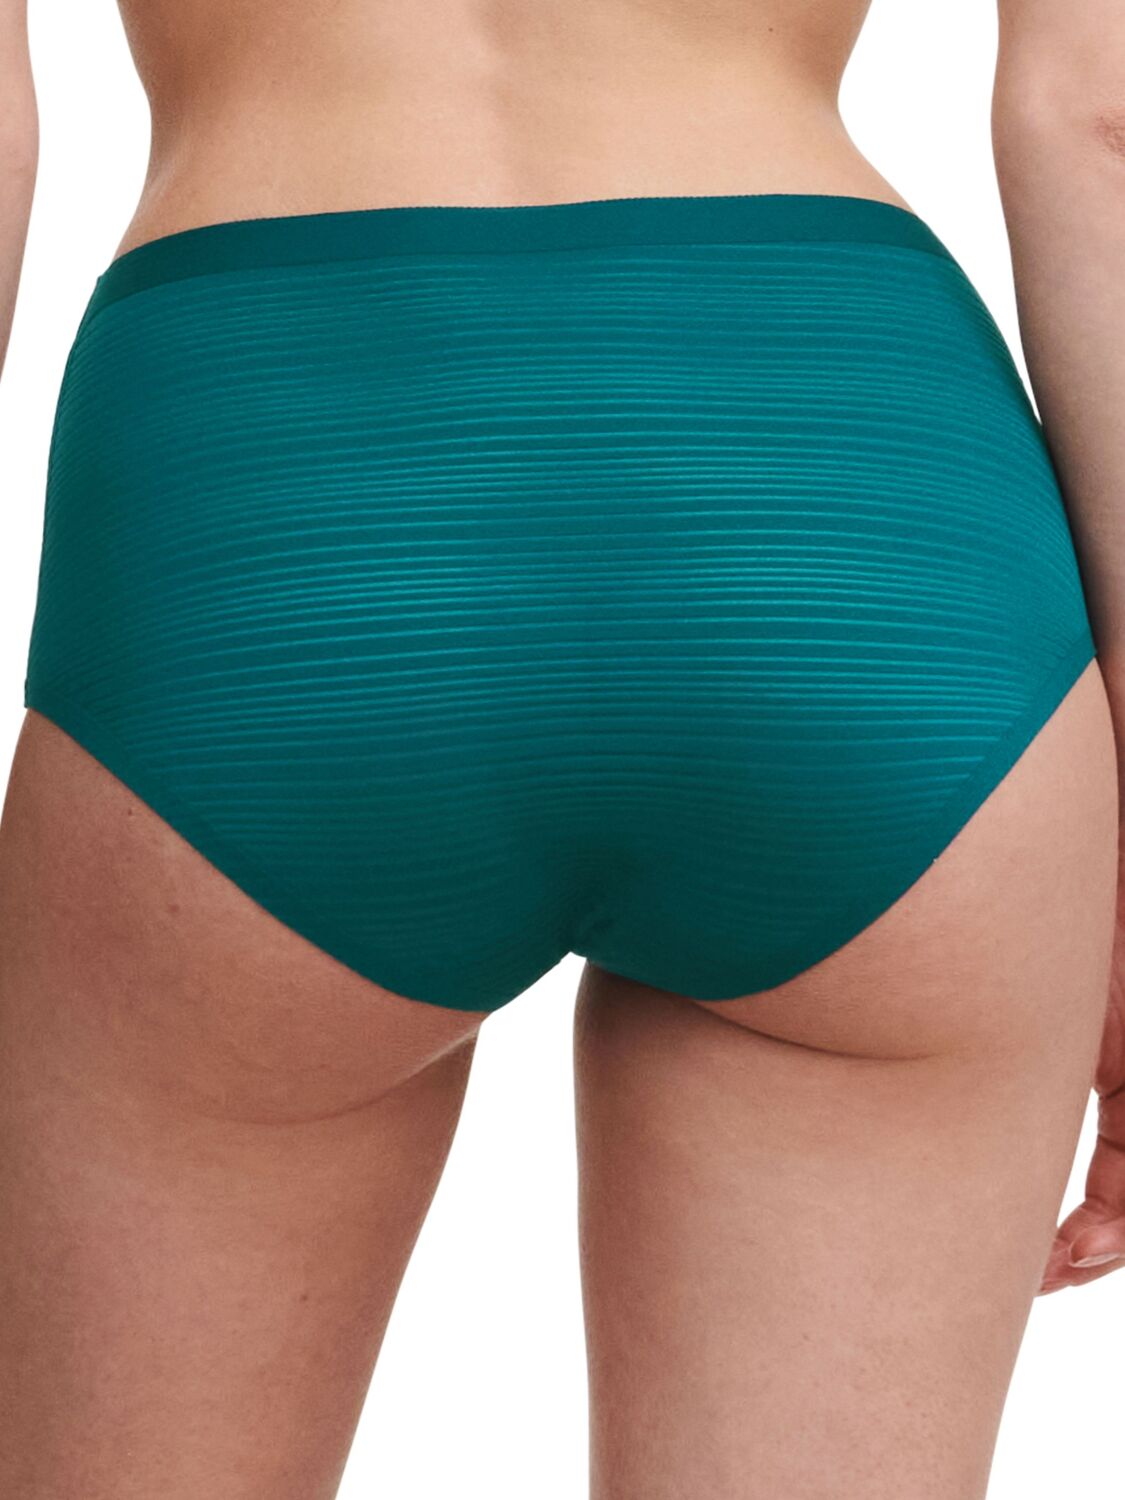 Chantelle Taillenslip ONE SIZE SoftStretch Stripes Farbe Oriental Green